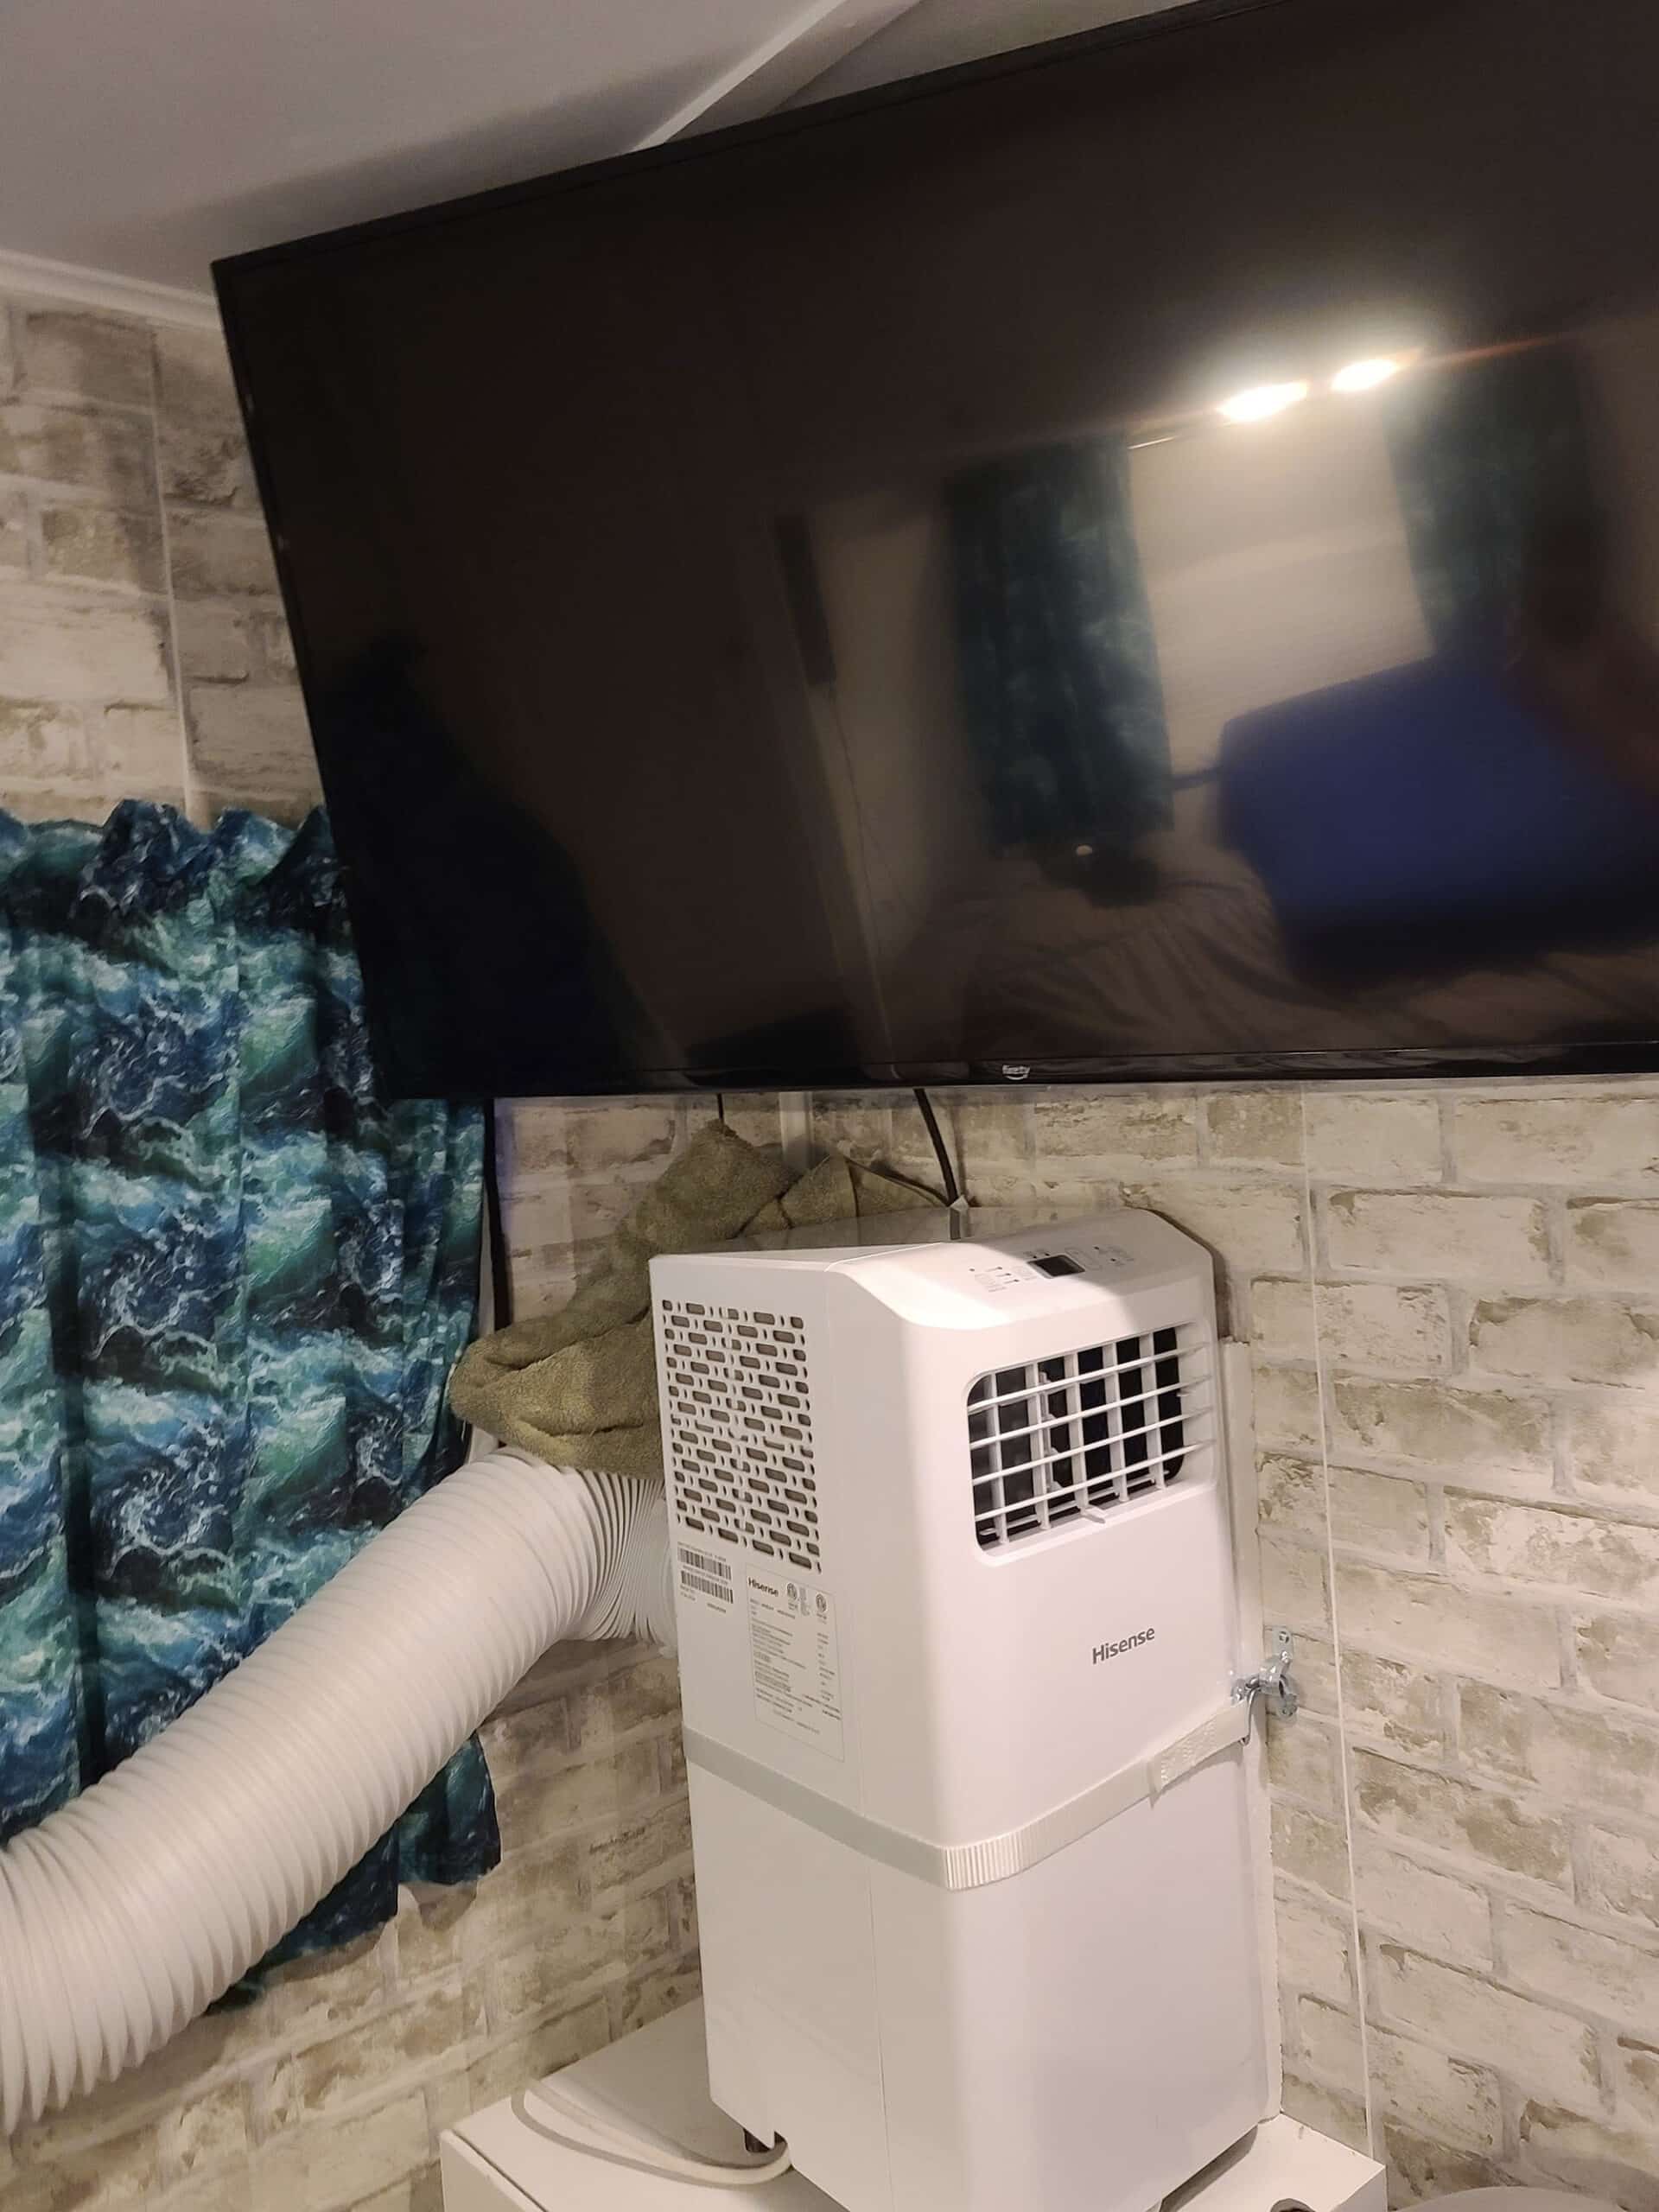 A large TV is off, mounted on the wall.  Underneath is a white portable air conditioner, mounted against the wall.